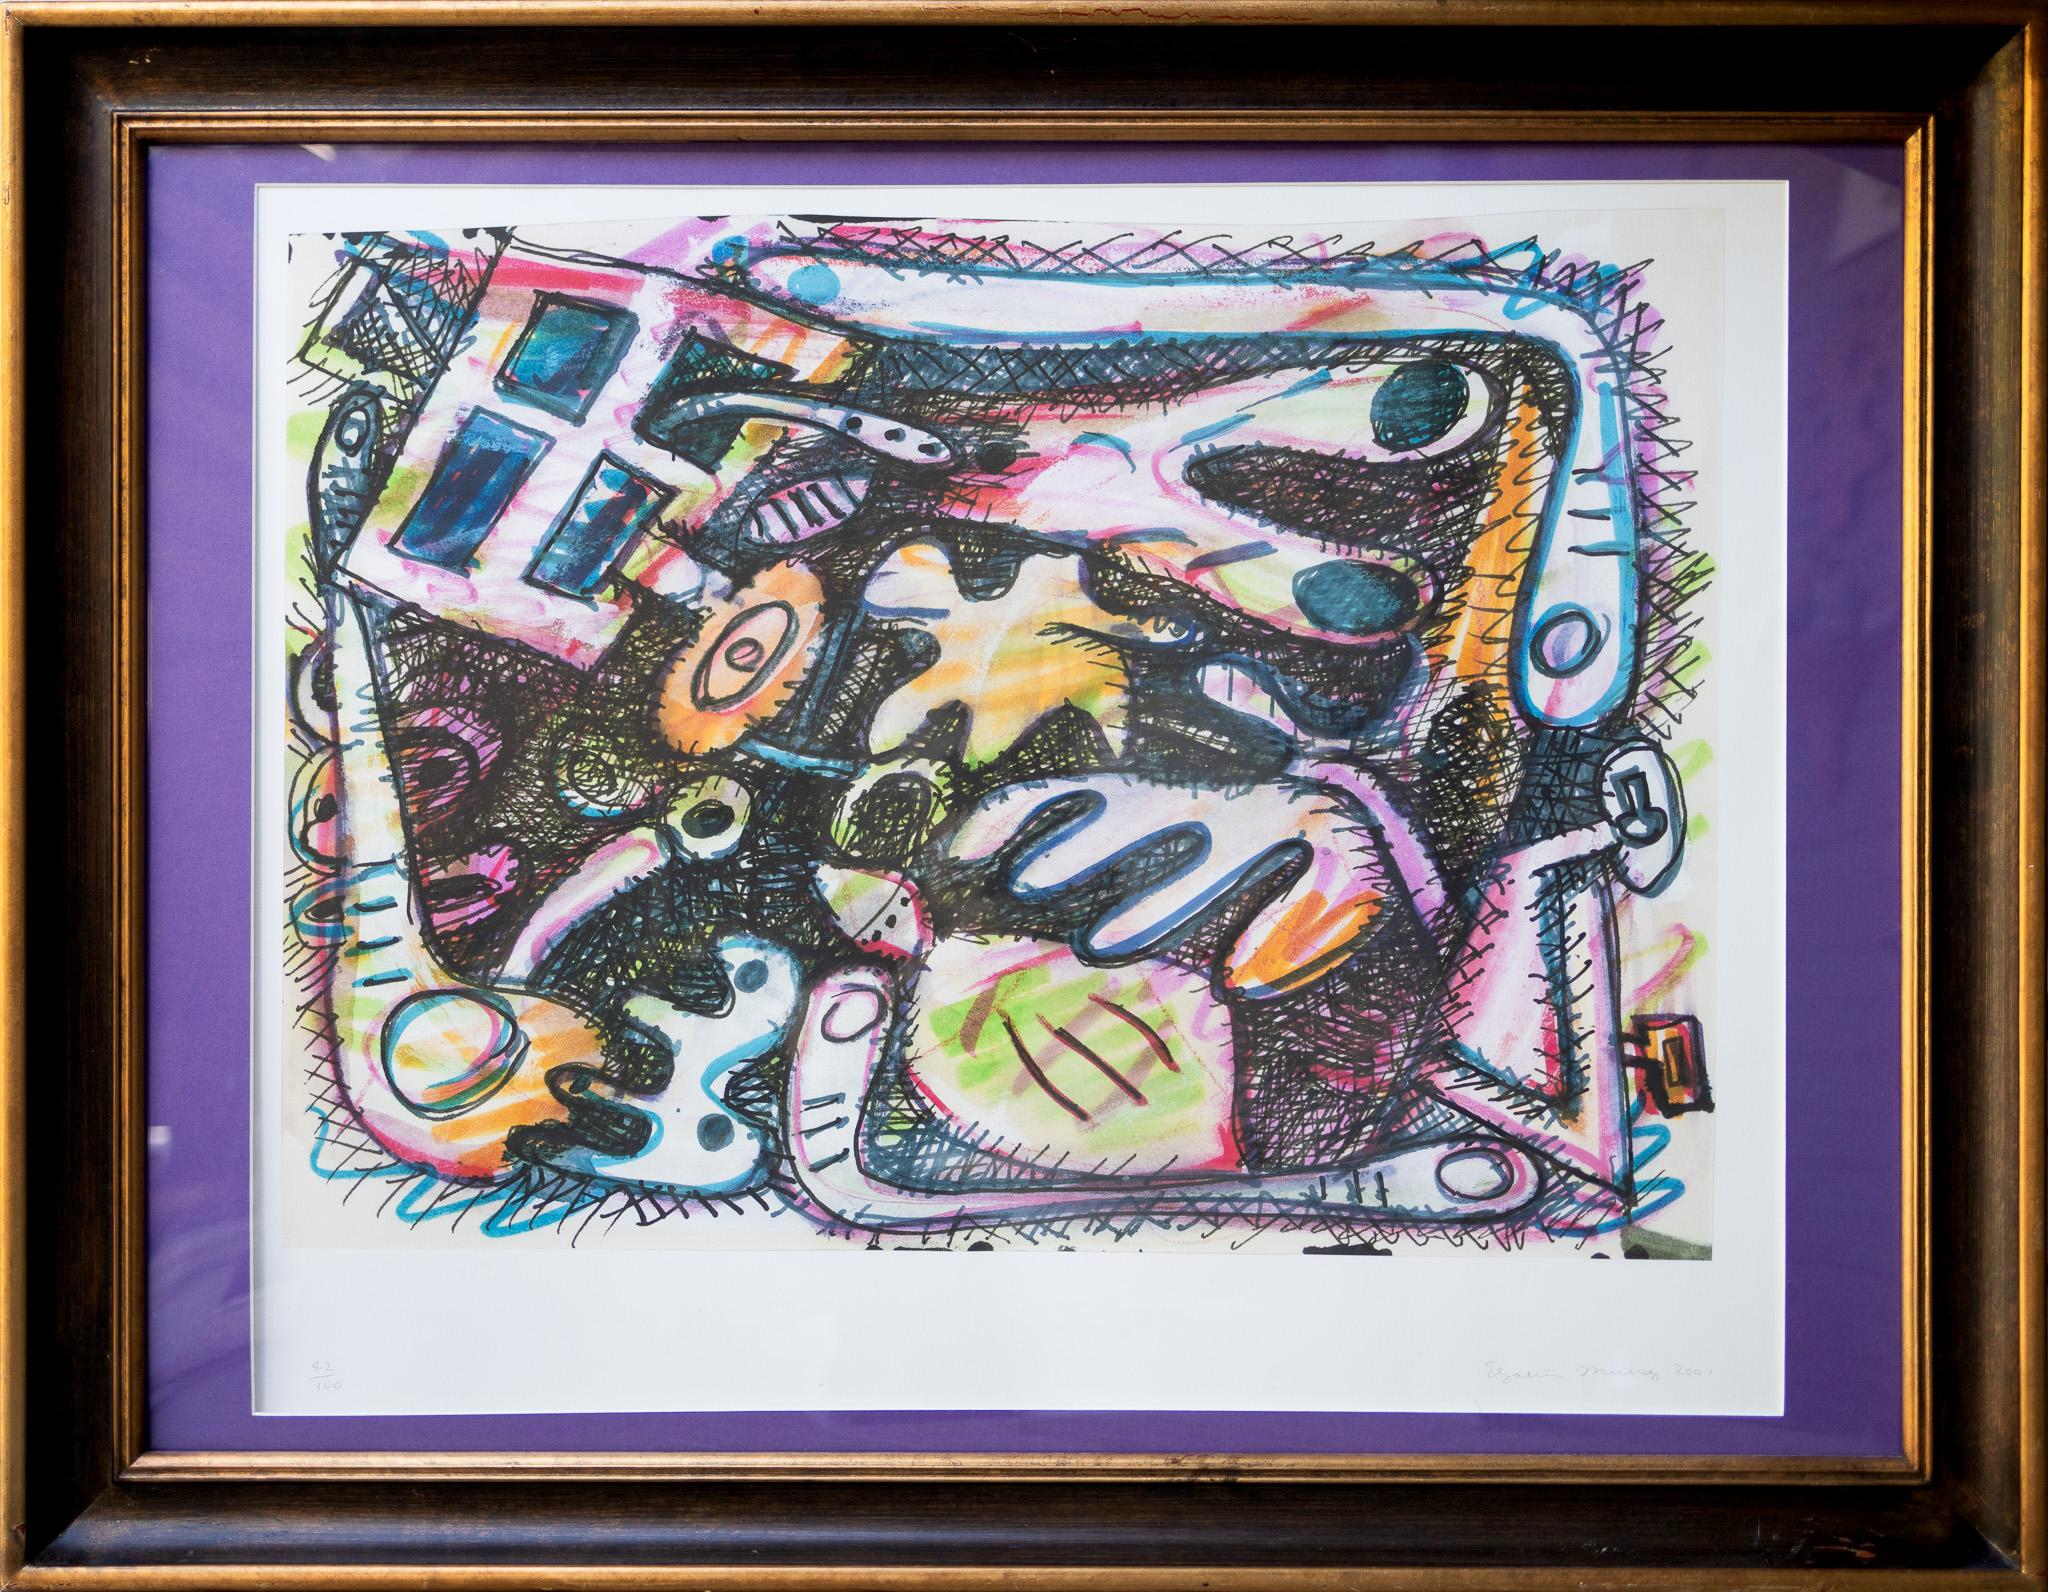 Elizabeth Murray Abstract Print - "Untitled Abstract" Art Colorful Graphic Black Pink Orange Purple Blue Pop Art